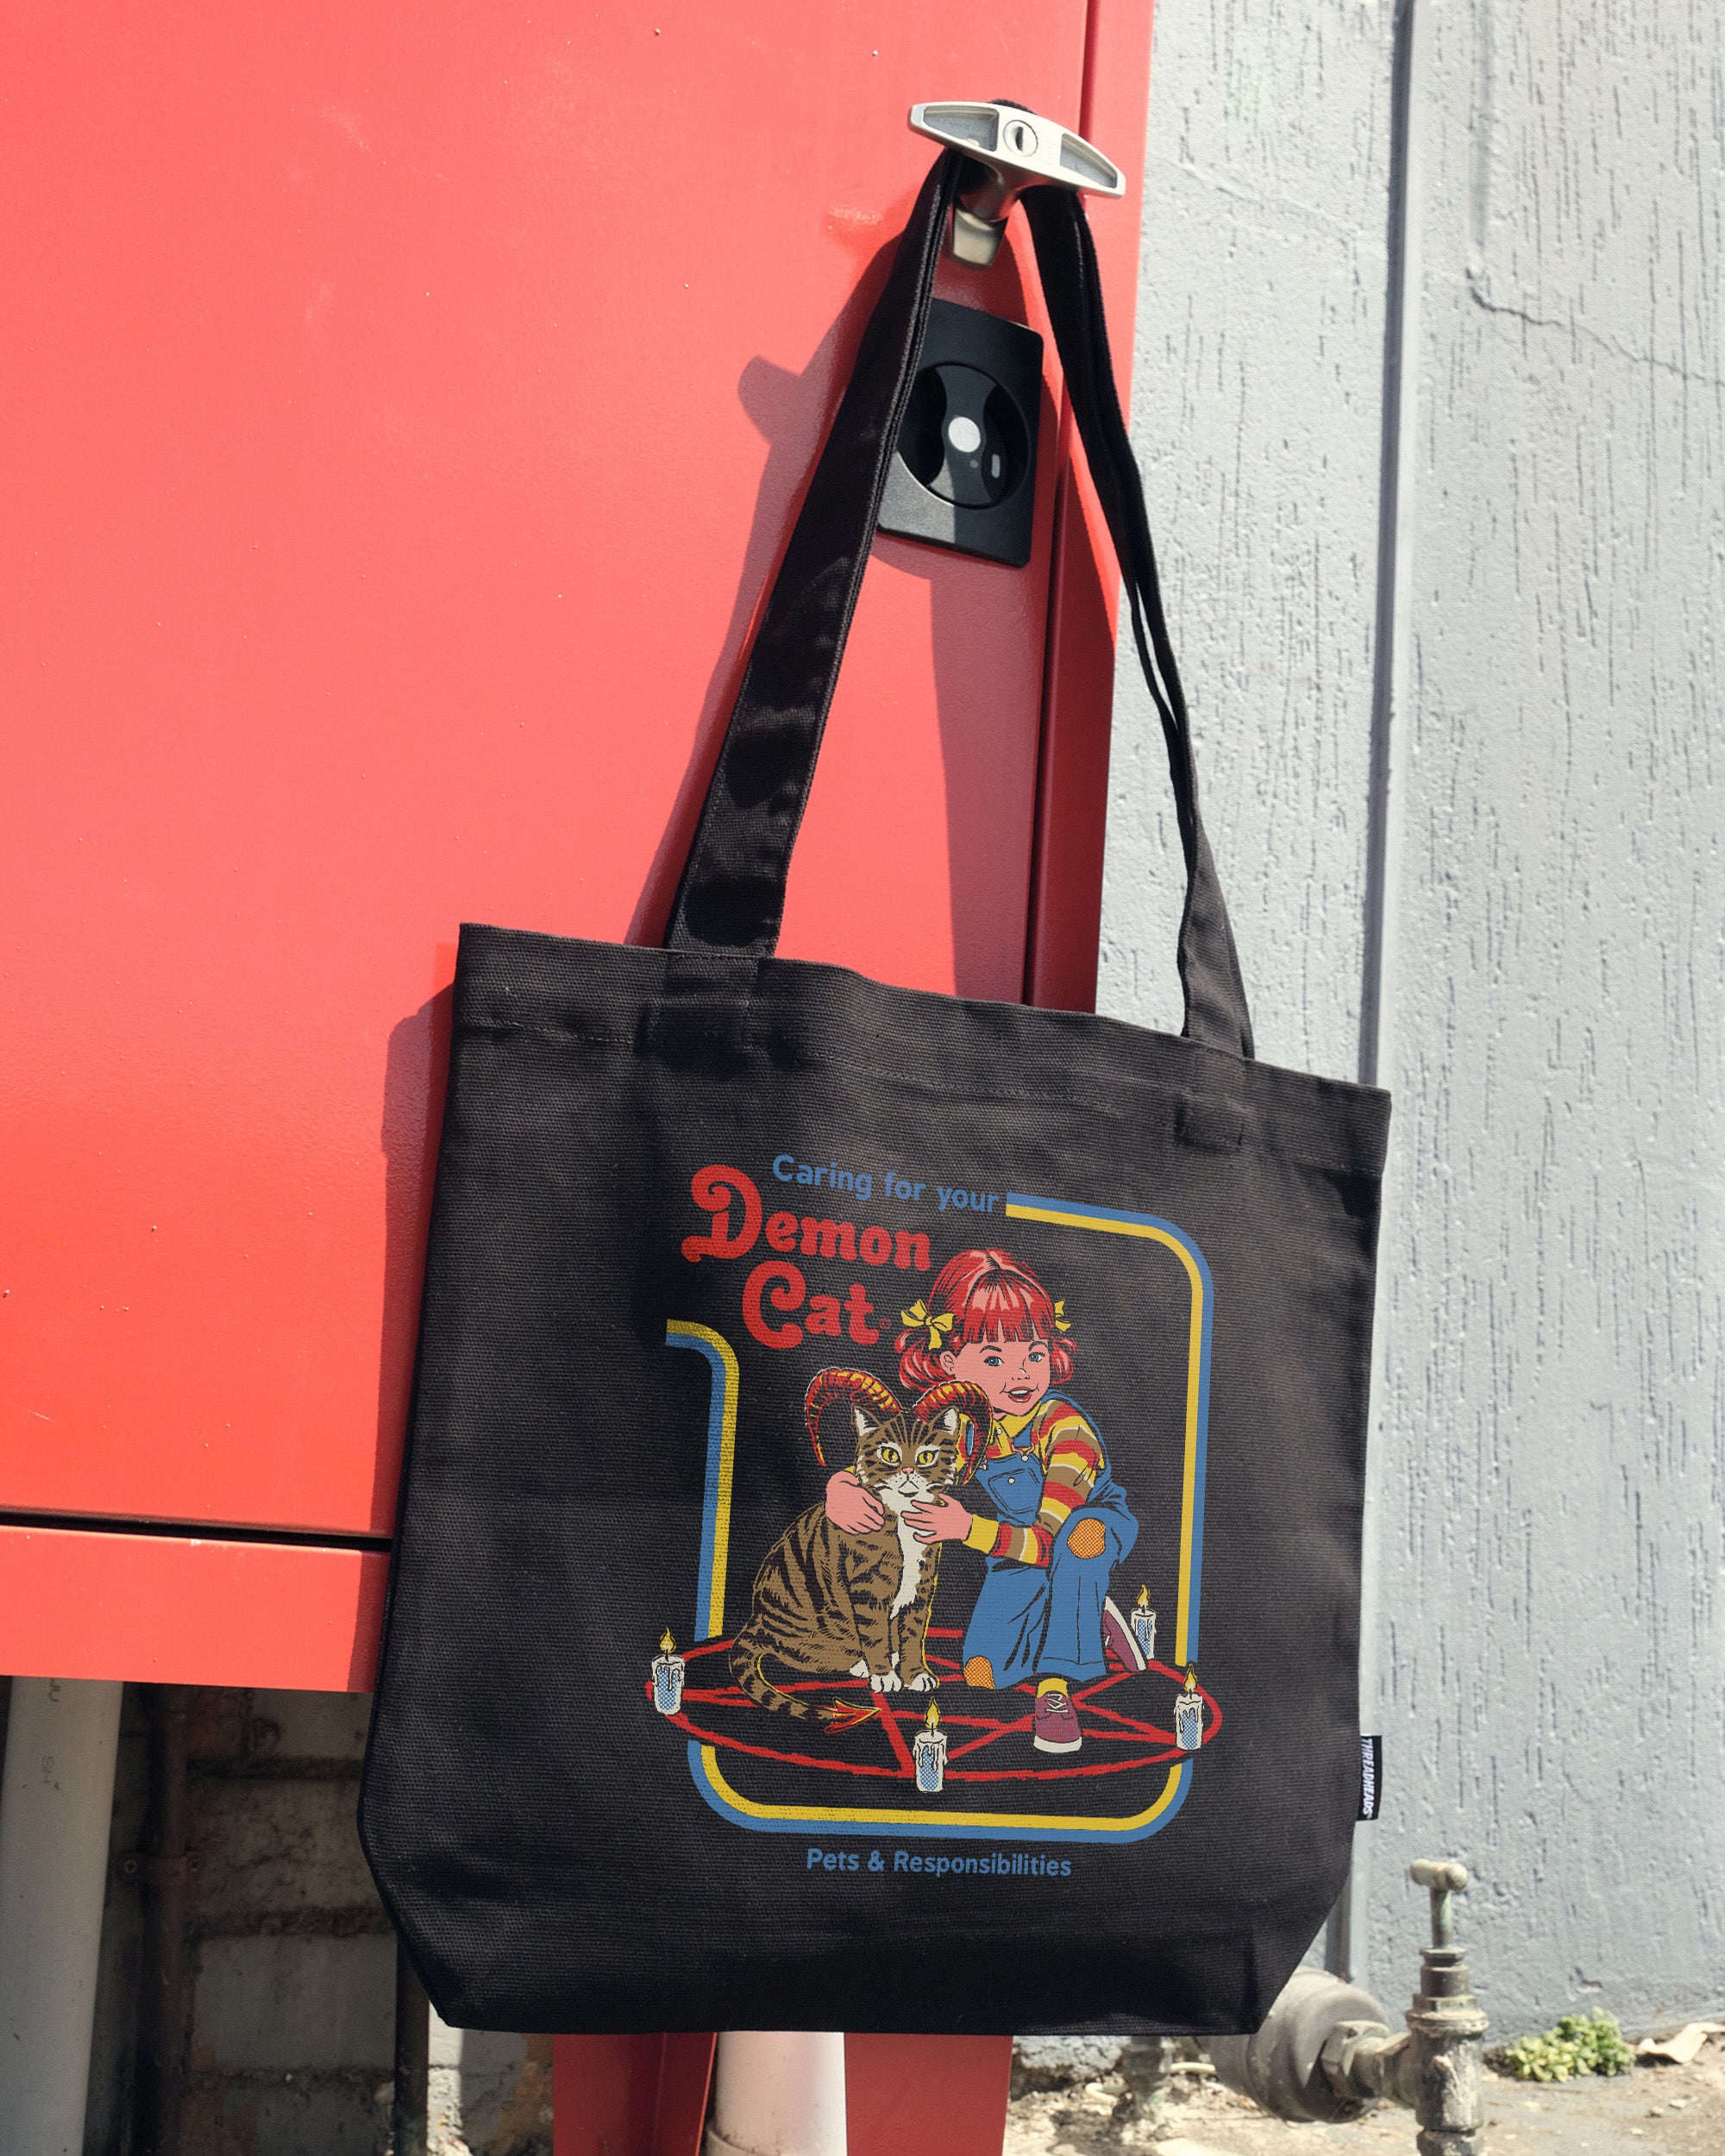 Caring for Your Demon Cat Tote Bag